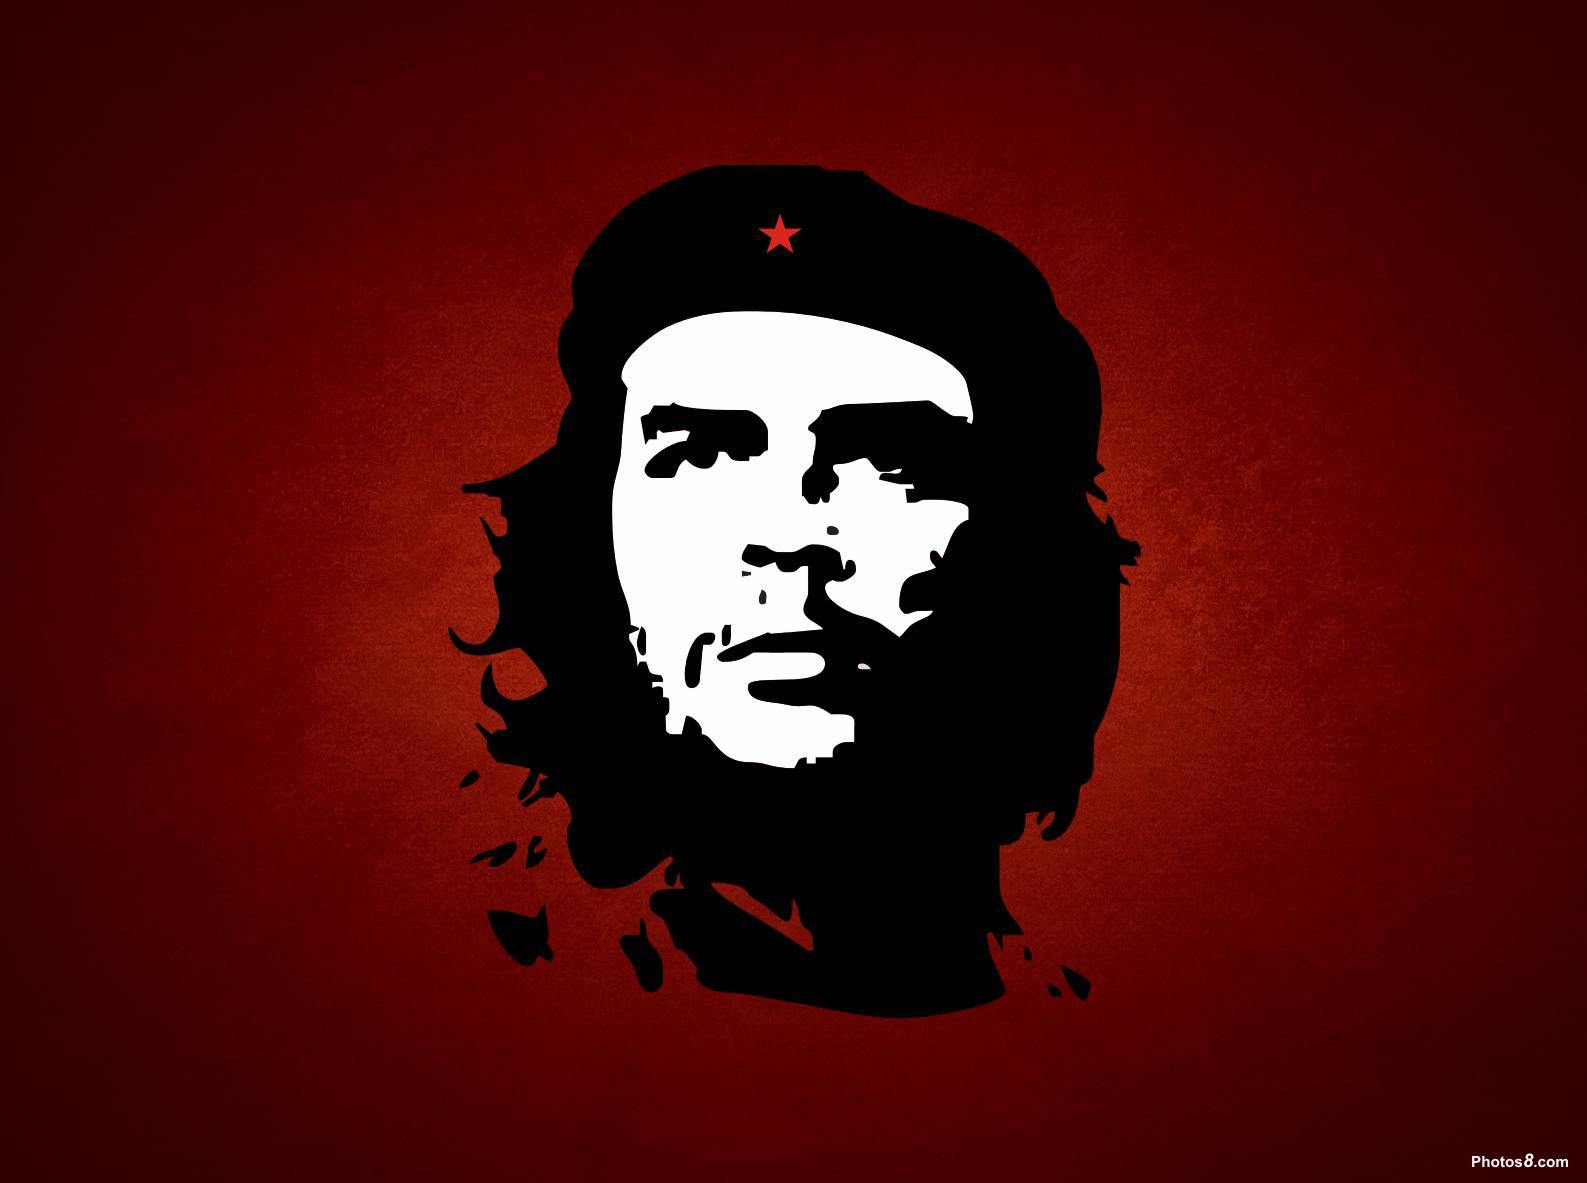 Best Ernesto Che Guevara wallpapers for phone screen